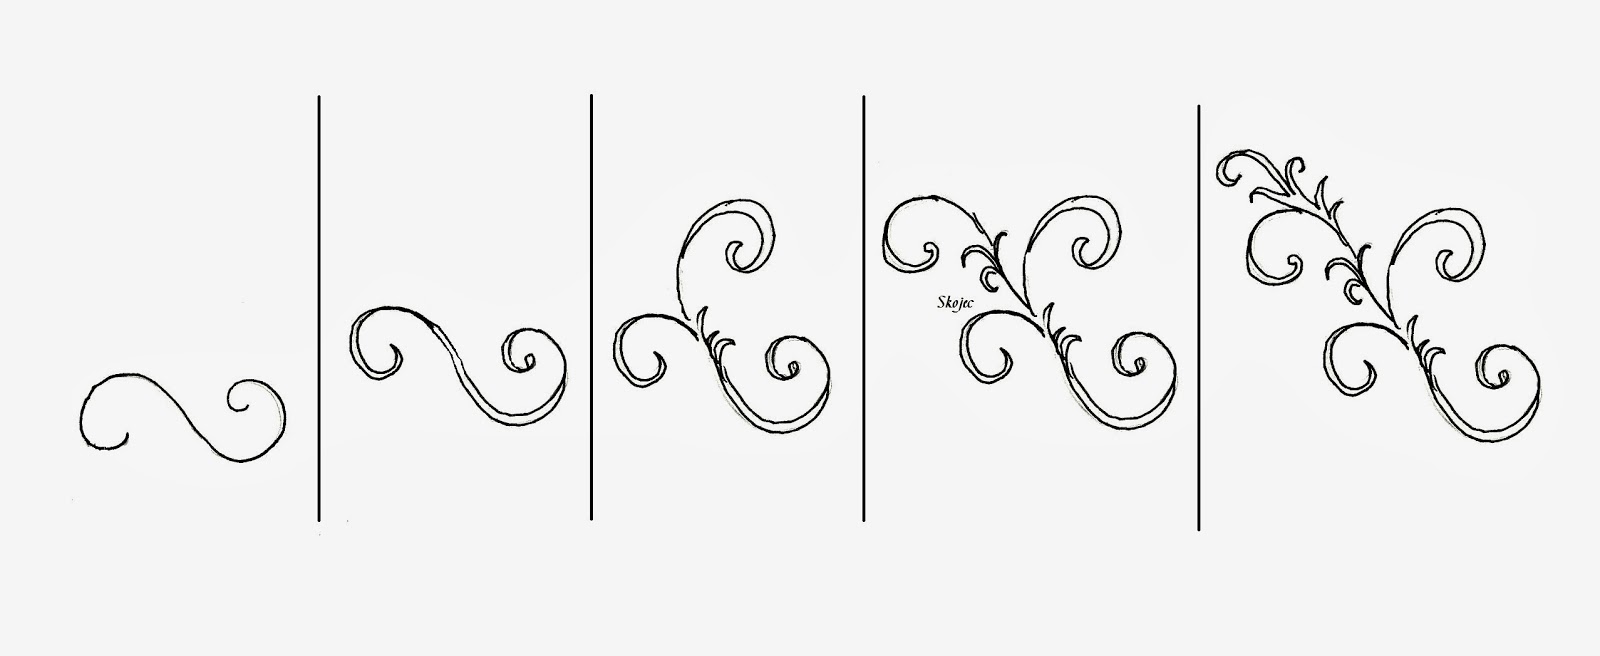 Art class ideas: How to Draw Scrolls and Scrollwork